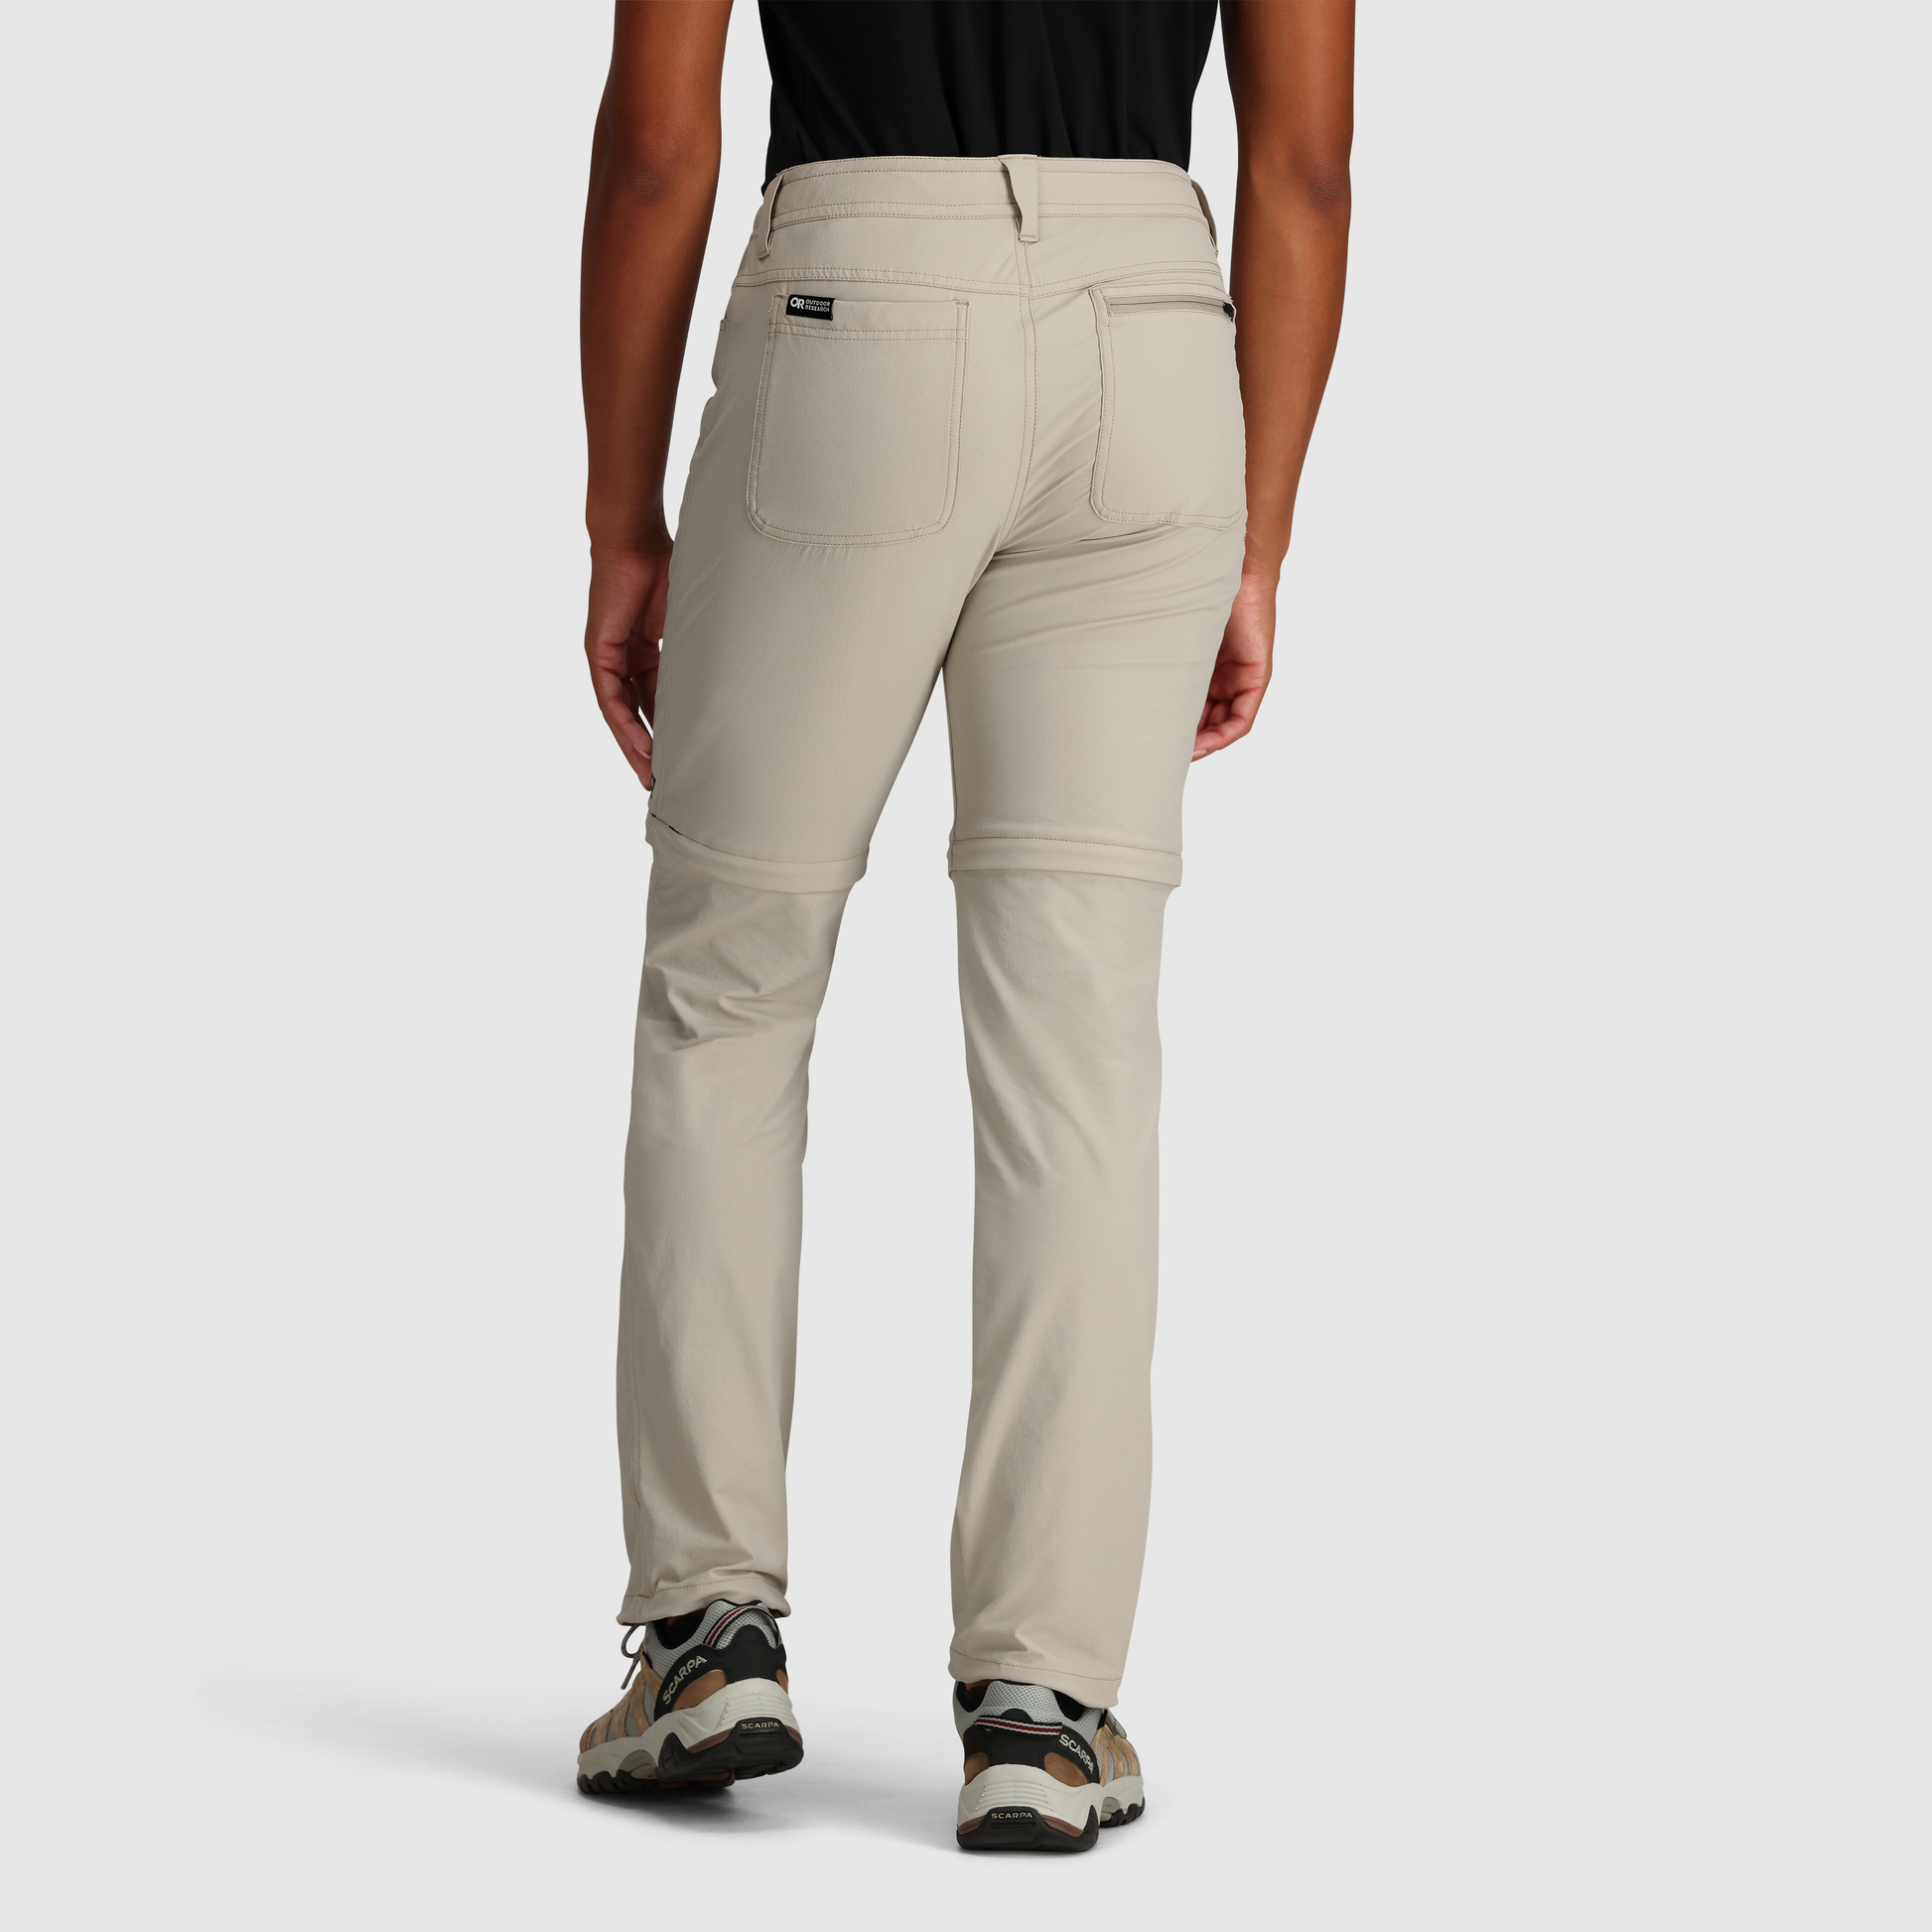 Review: Outdoor Research Ferrosi Convertible Pants - The Big Outside